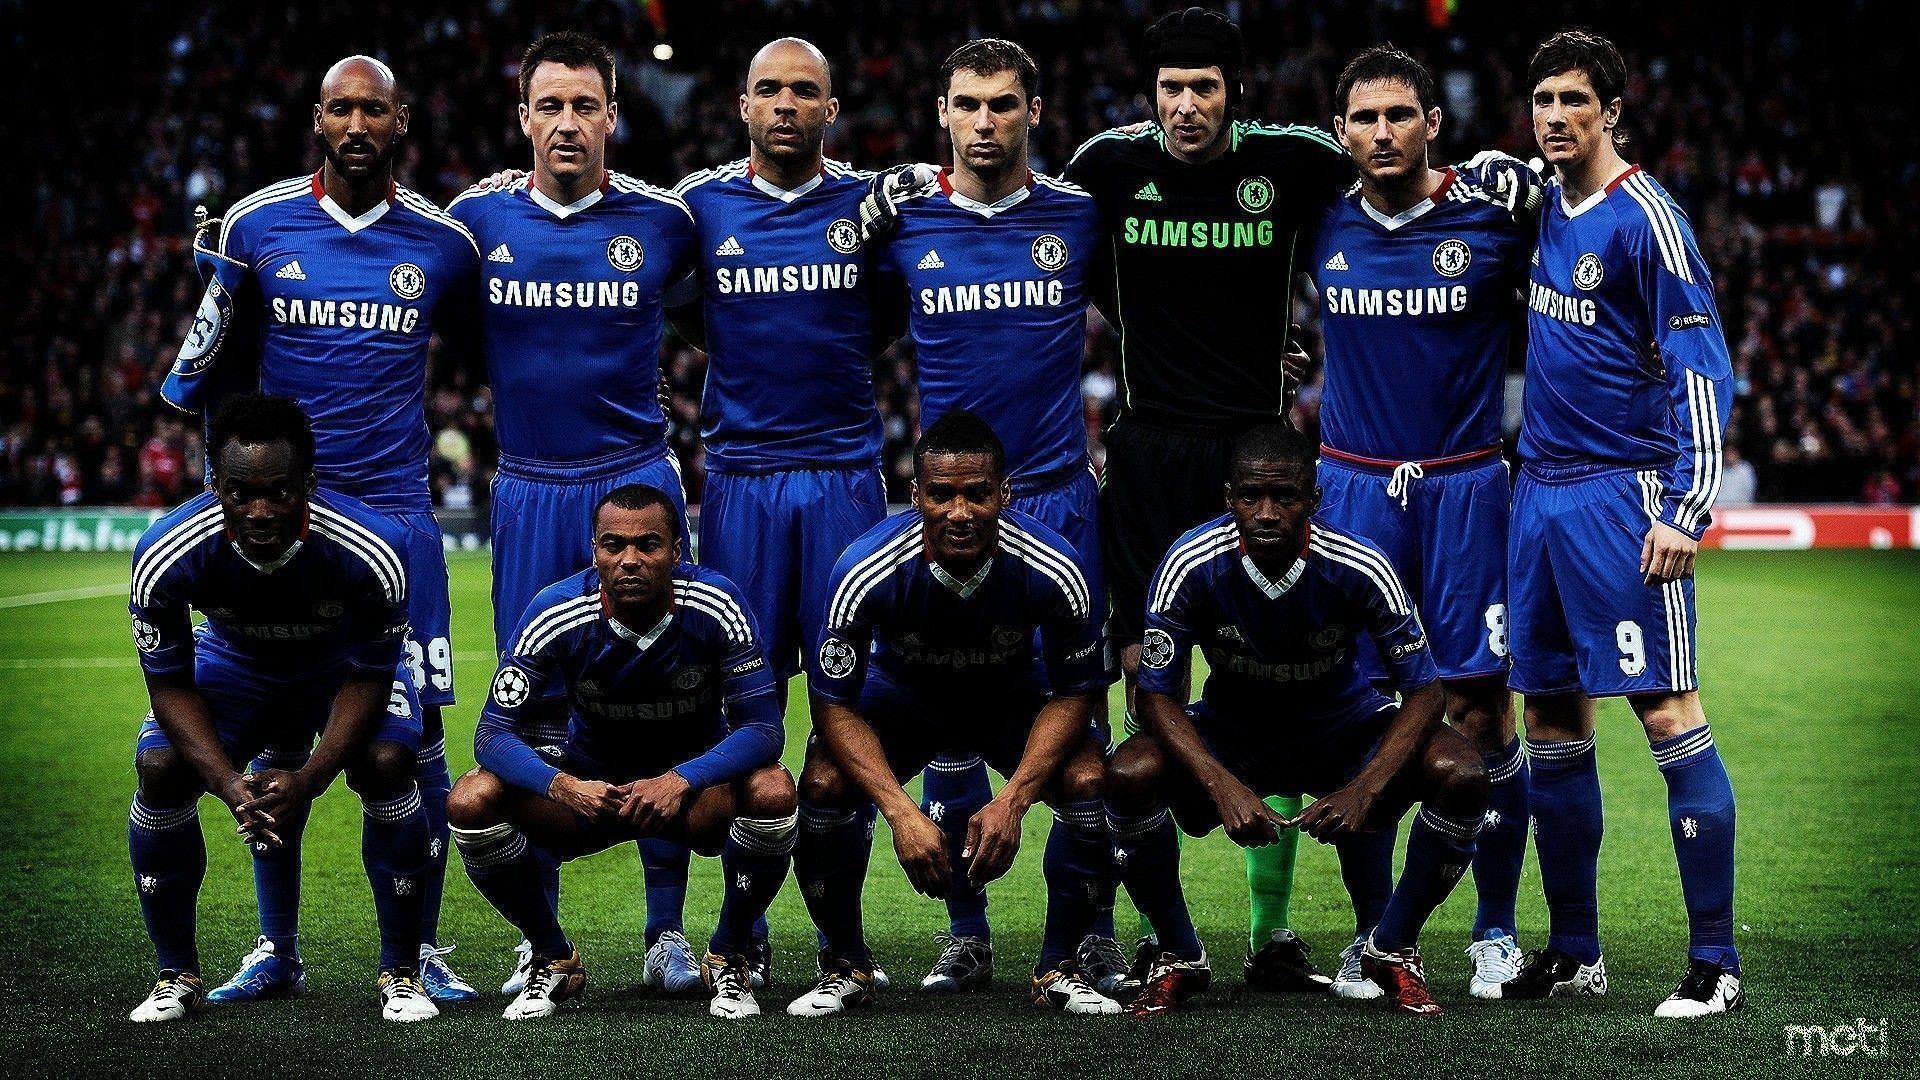 1920x1080 Chelsea football wallpapers in HD - English soccer club from London